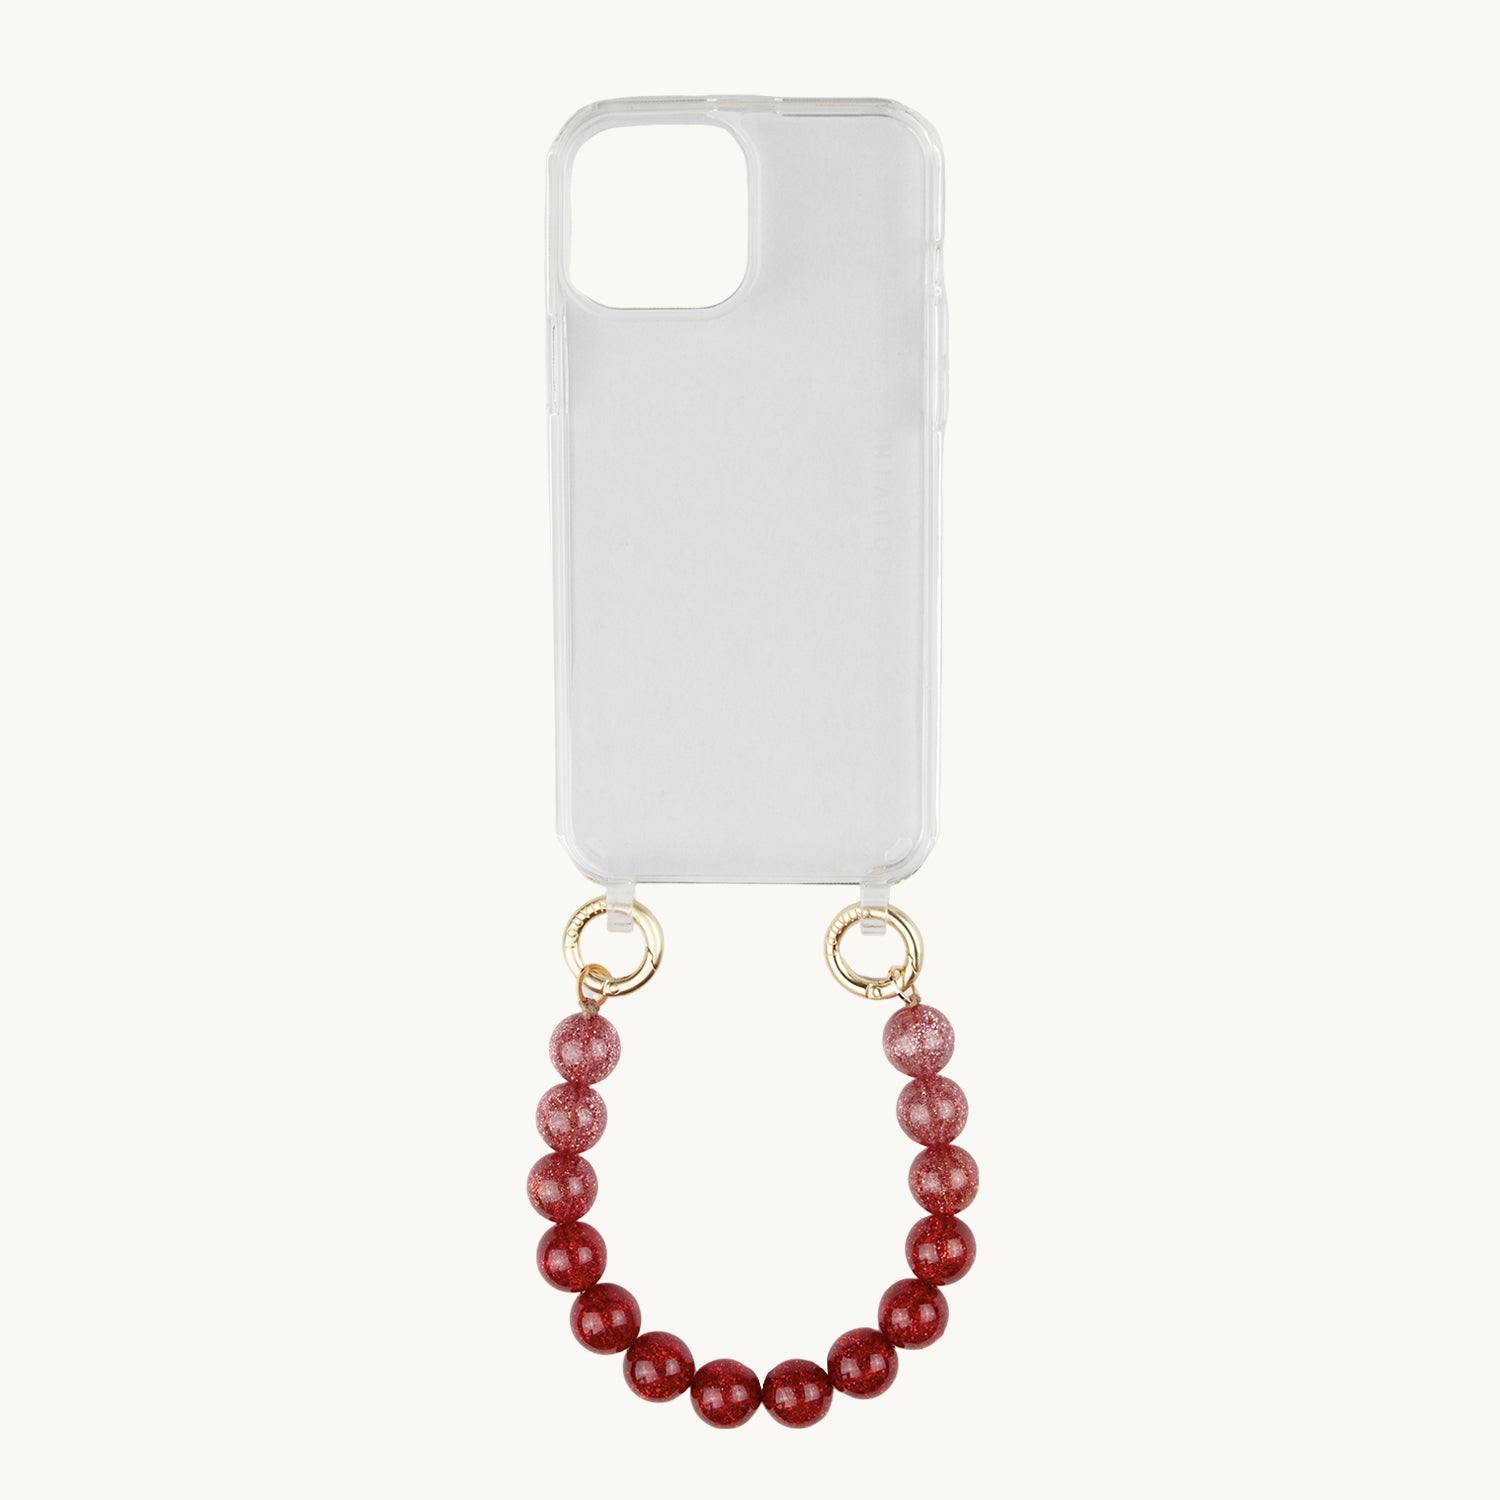 CHARLIE IPHONE CASE & RED PETIT BILLY CHAIN